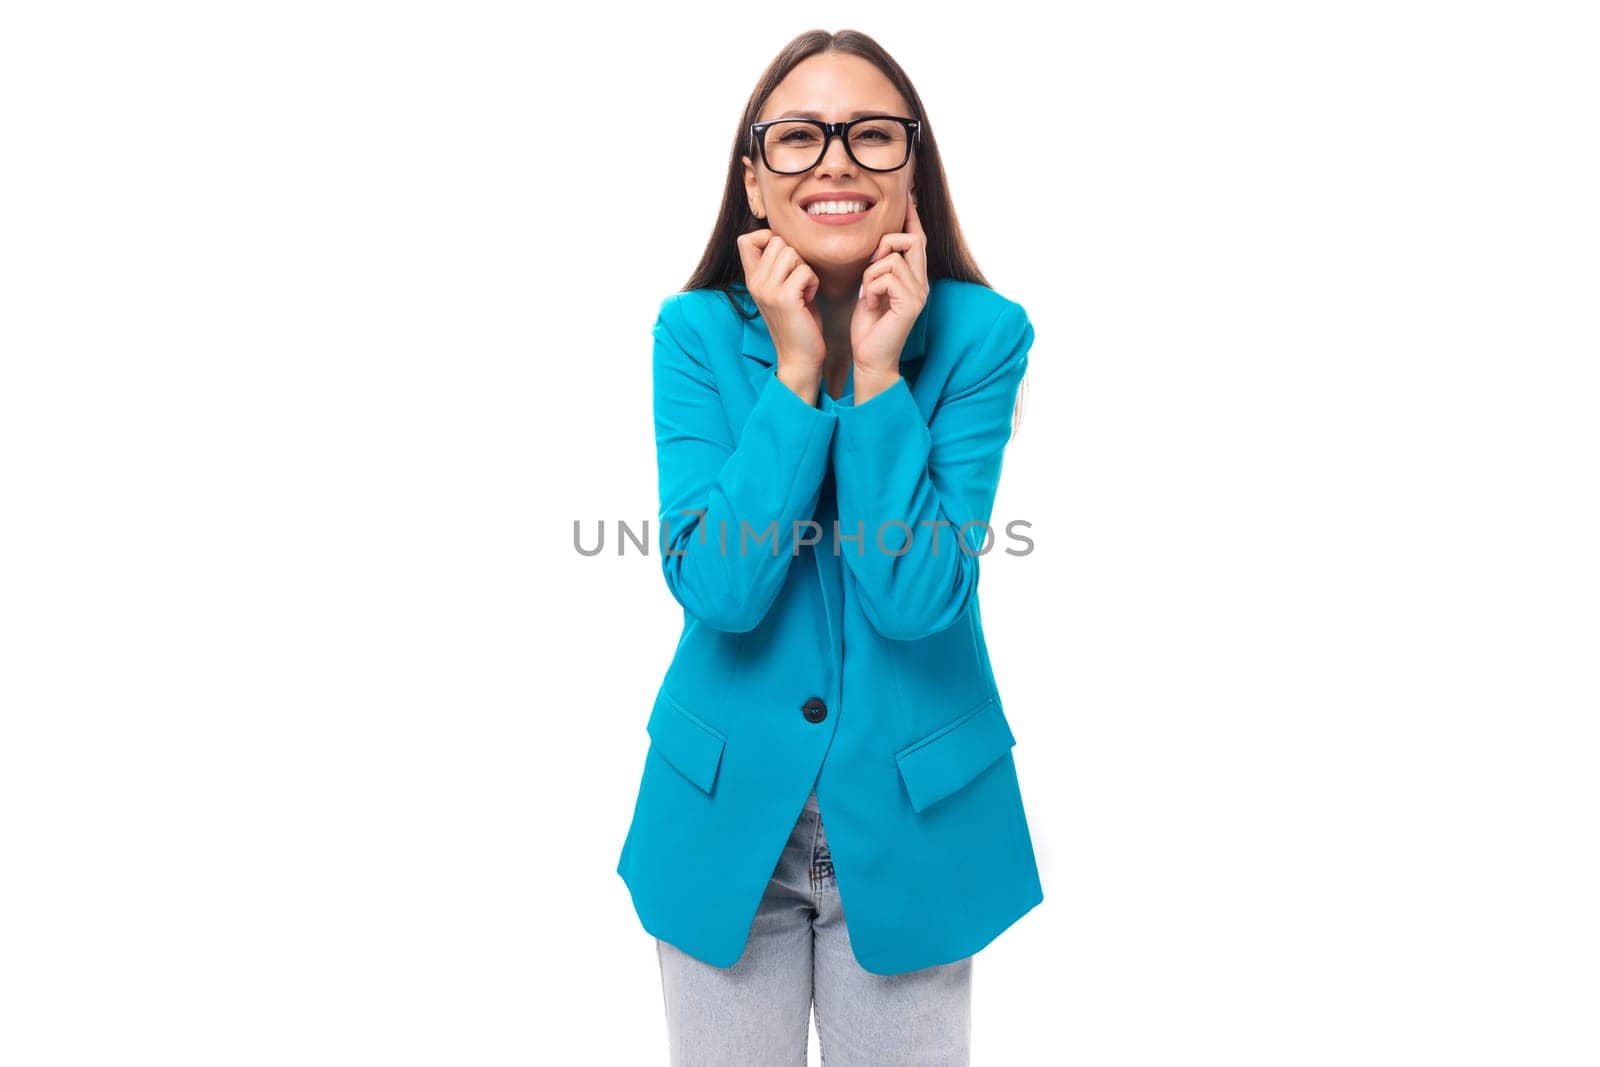 young pretty office worker woman in a blue business jacket looks successful and happy on a white background with copy space.